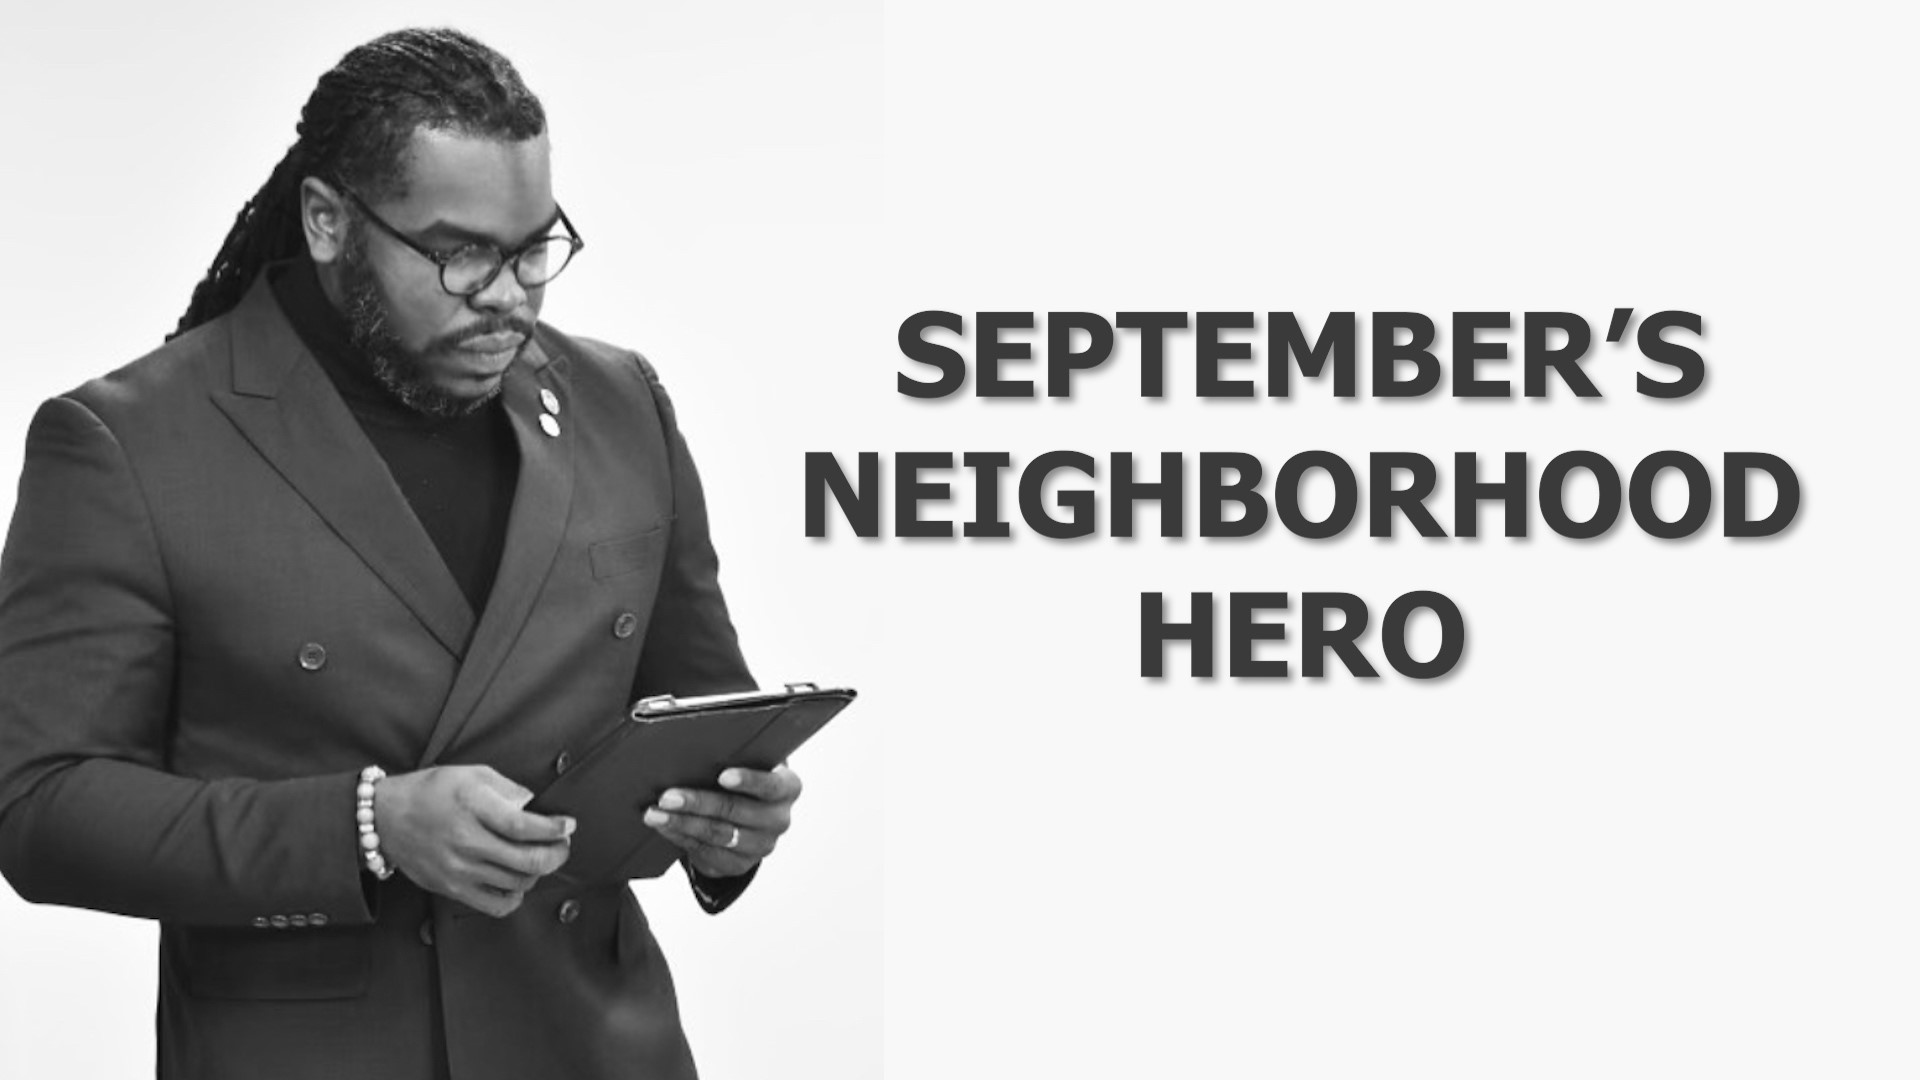 Diggs is a pastor, a mentor, a father, husband, friend and this month's neighborhood hero.